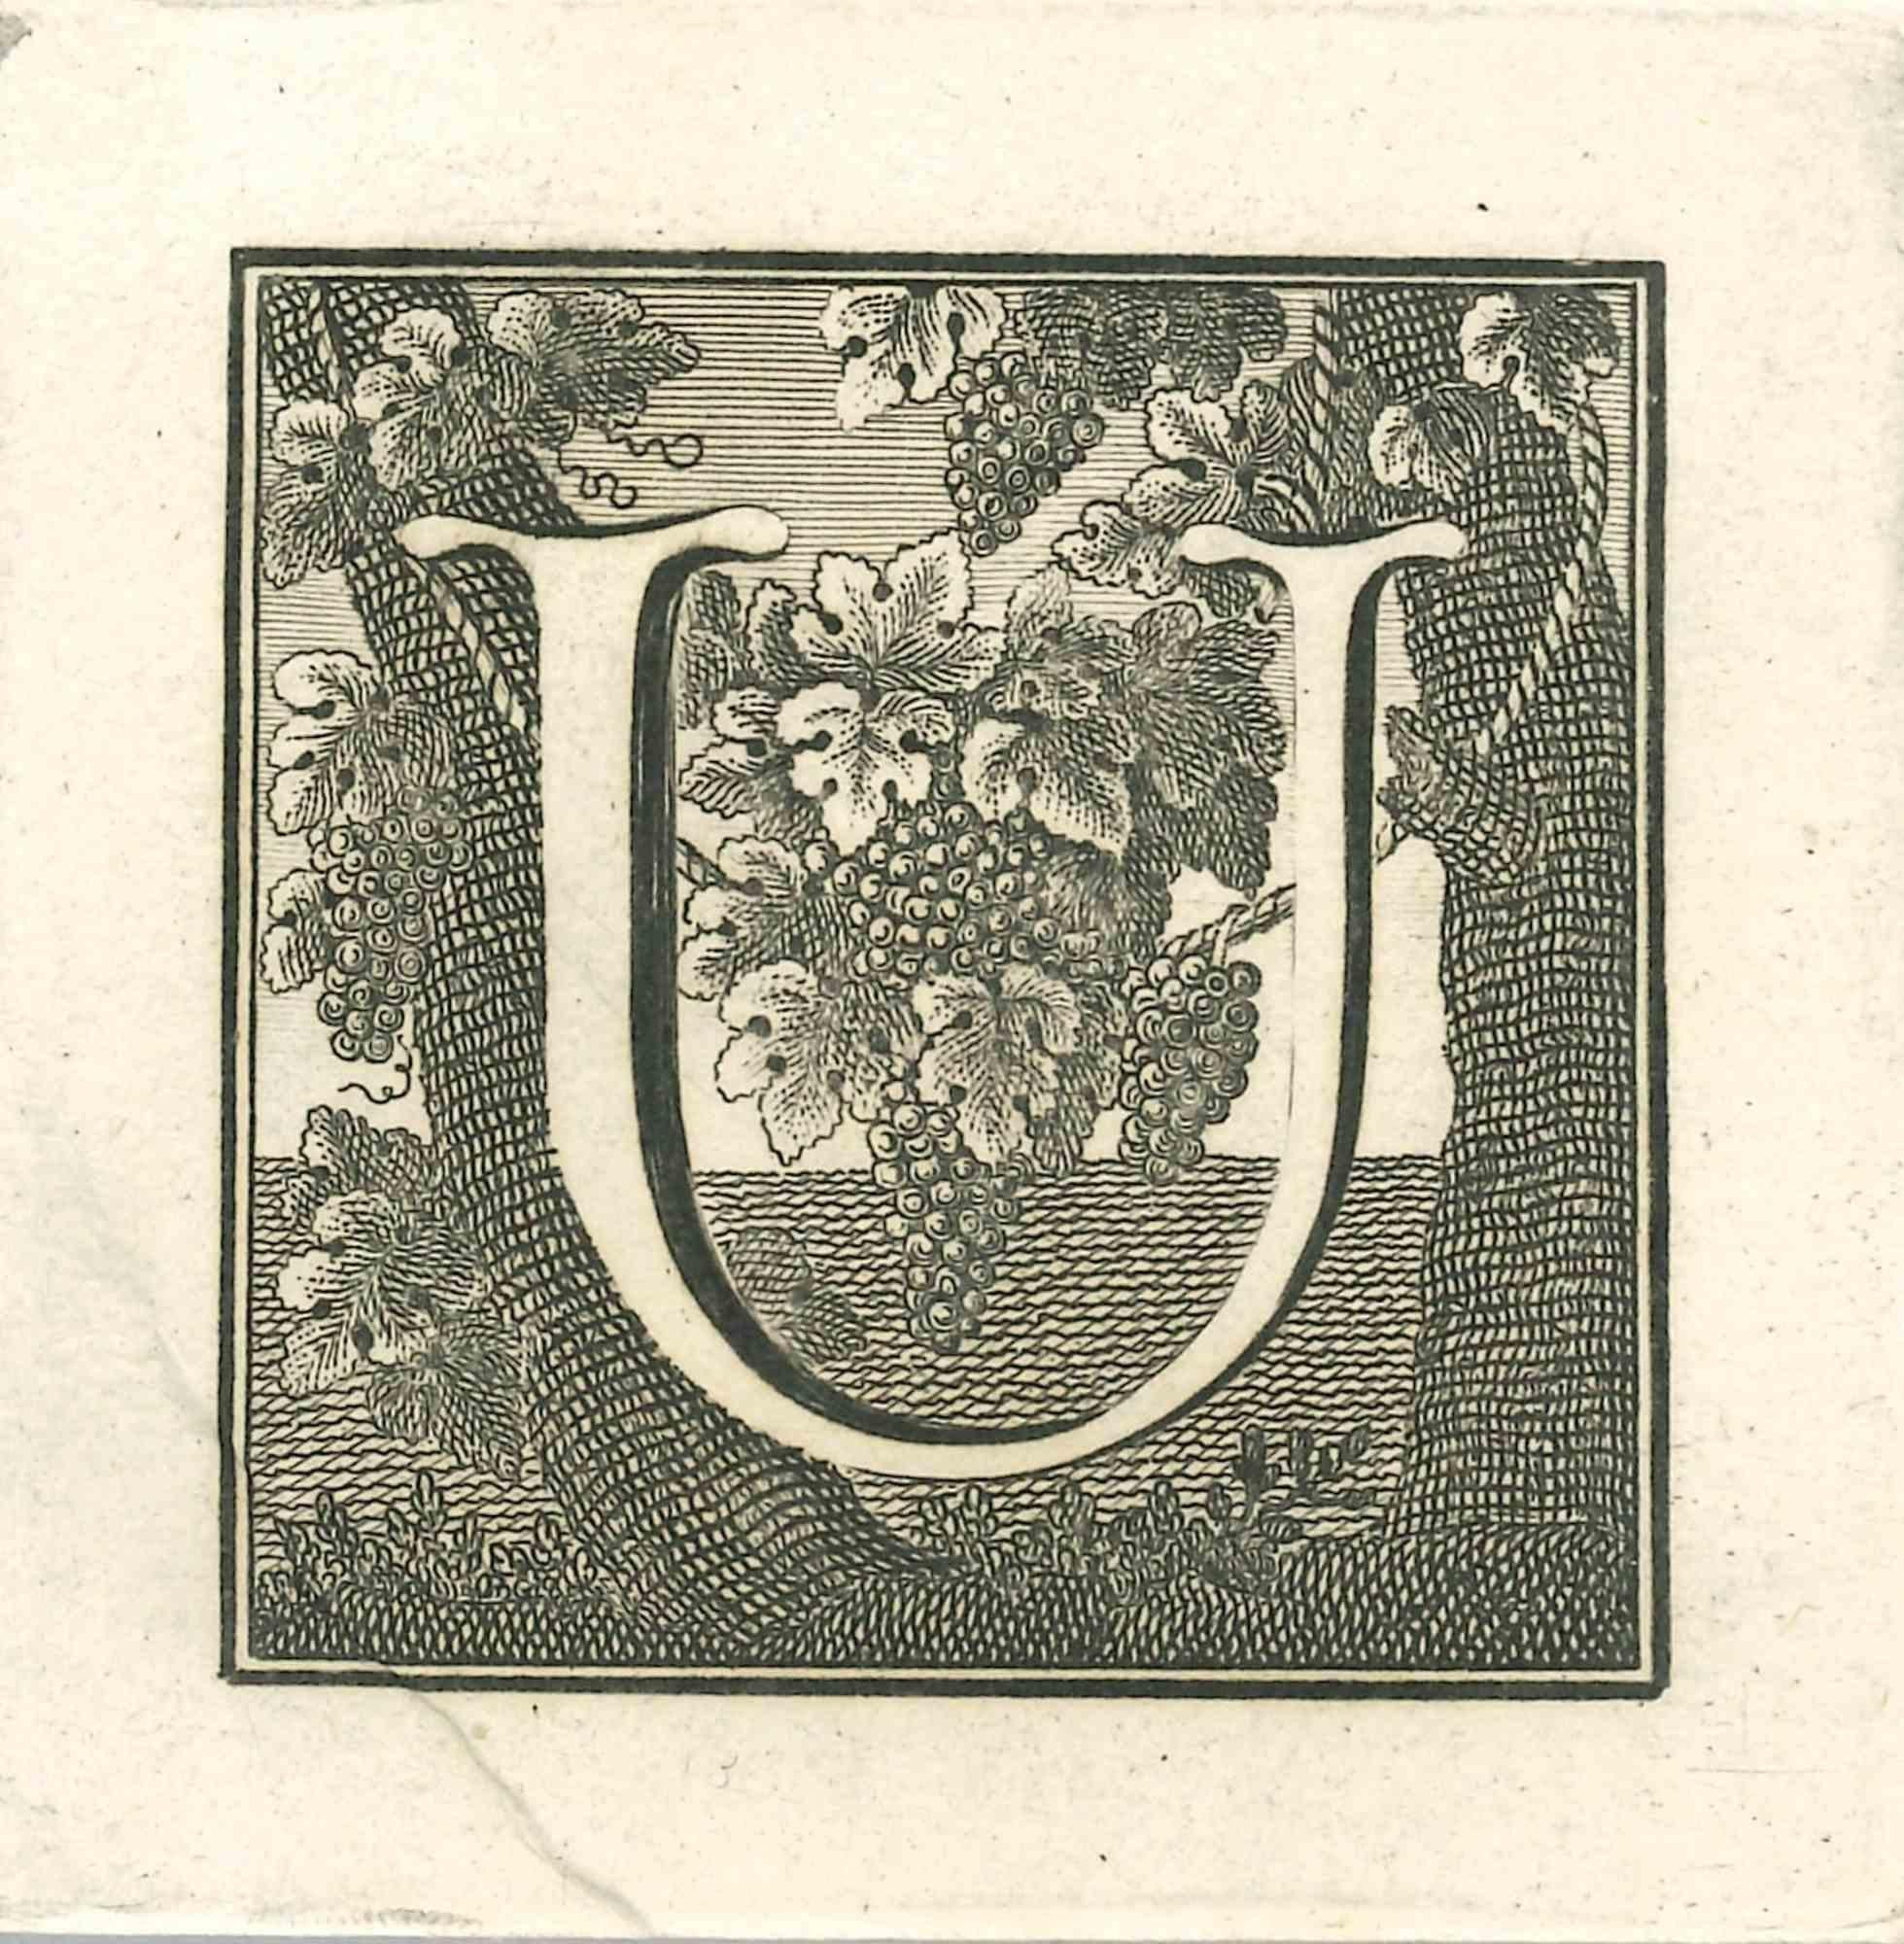 Letter U is an Etching realized by Luigi Vanvitelli.

The etching belongs to the print suite “Antiquities of Herculaneum Exposed” (original title: “Le Antichità di Ercolano Esposte”), an eight-volume volume of engravings of the finds from the